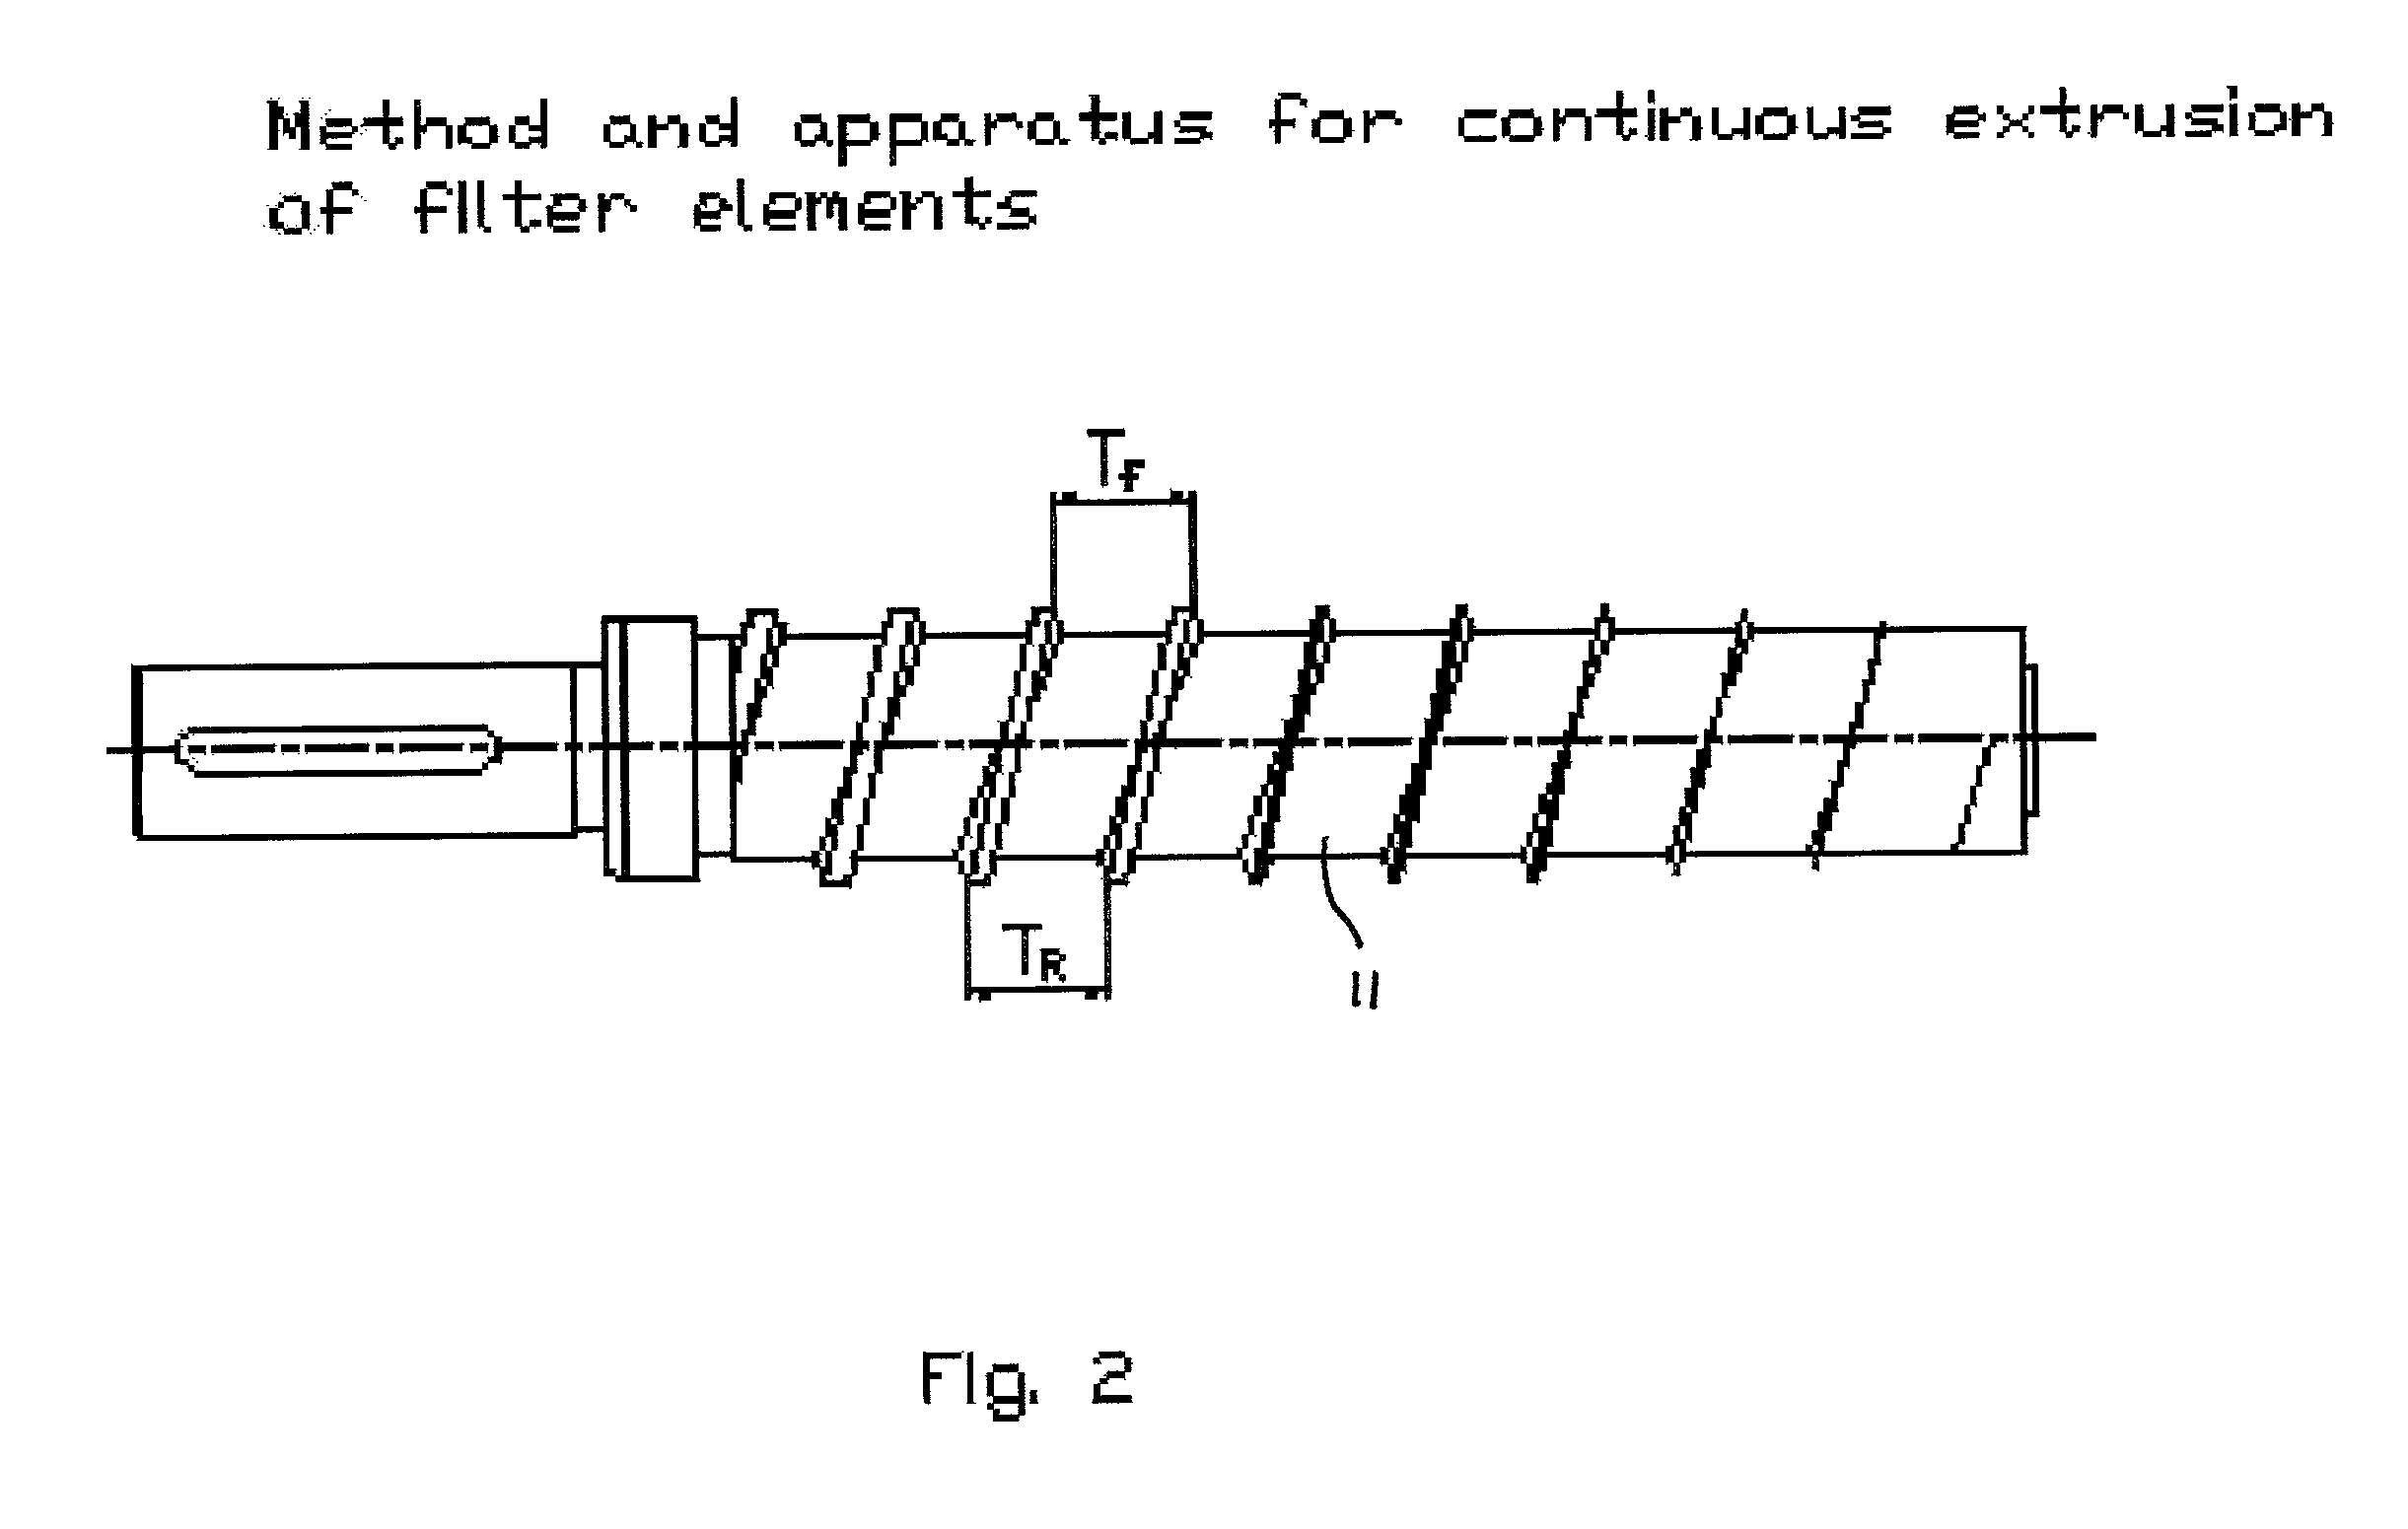 Method and apparatus for continuous extrusion of filter elements